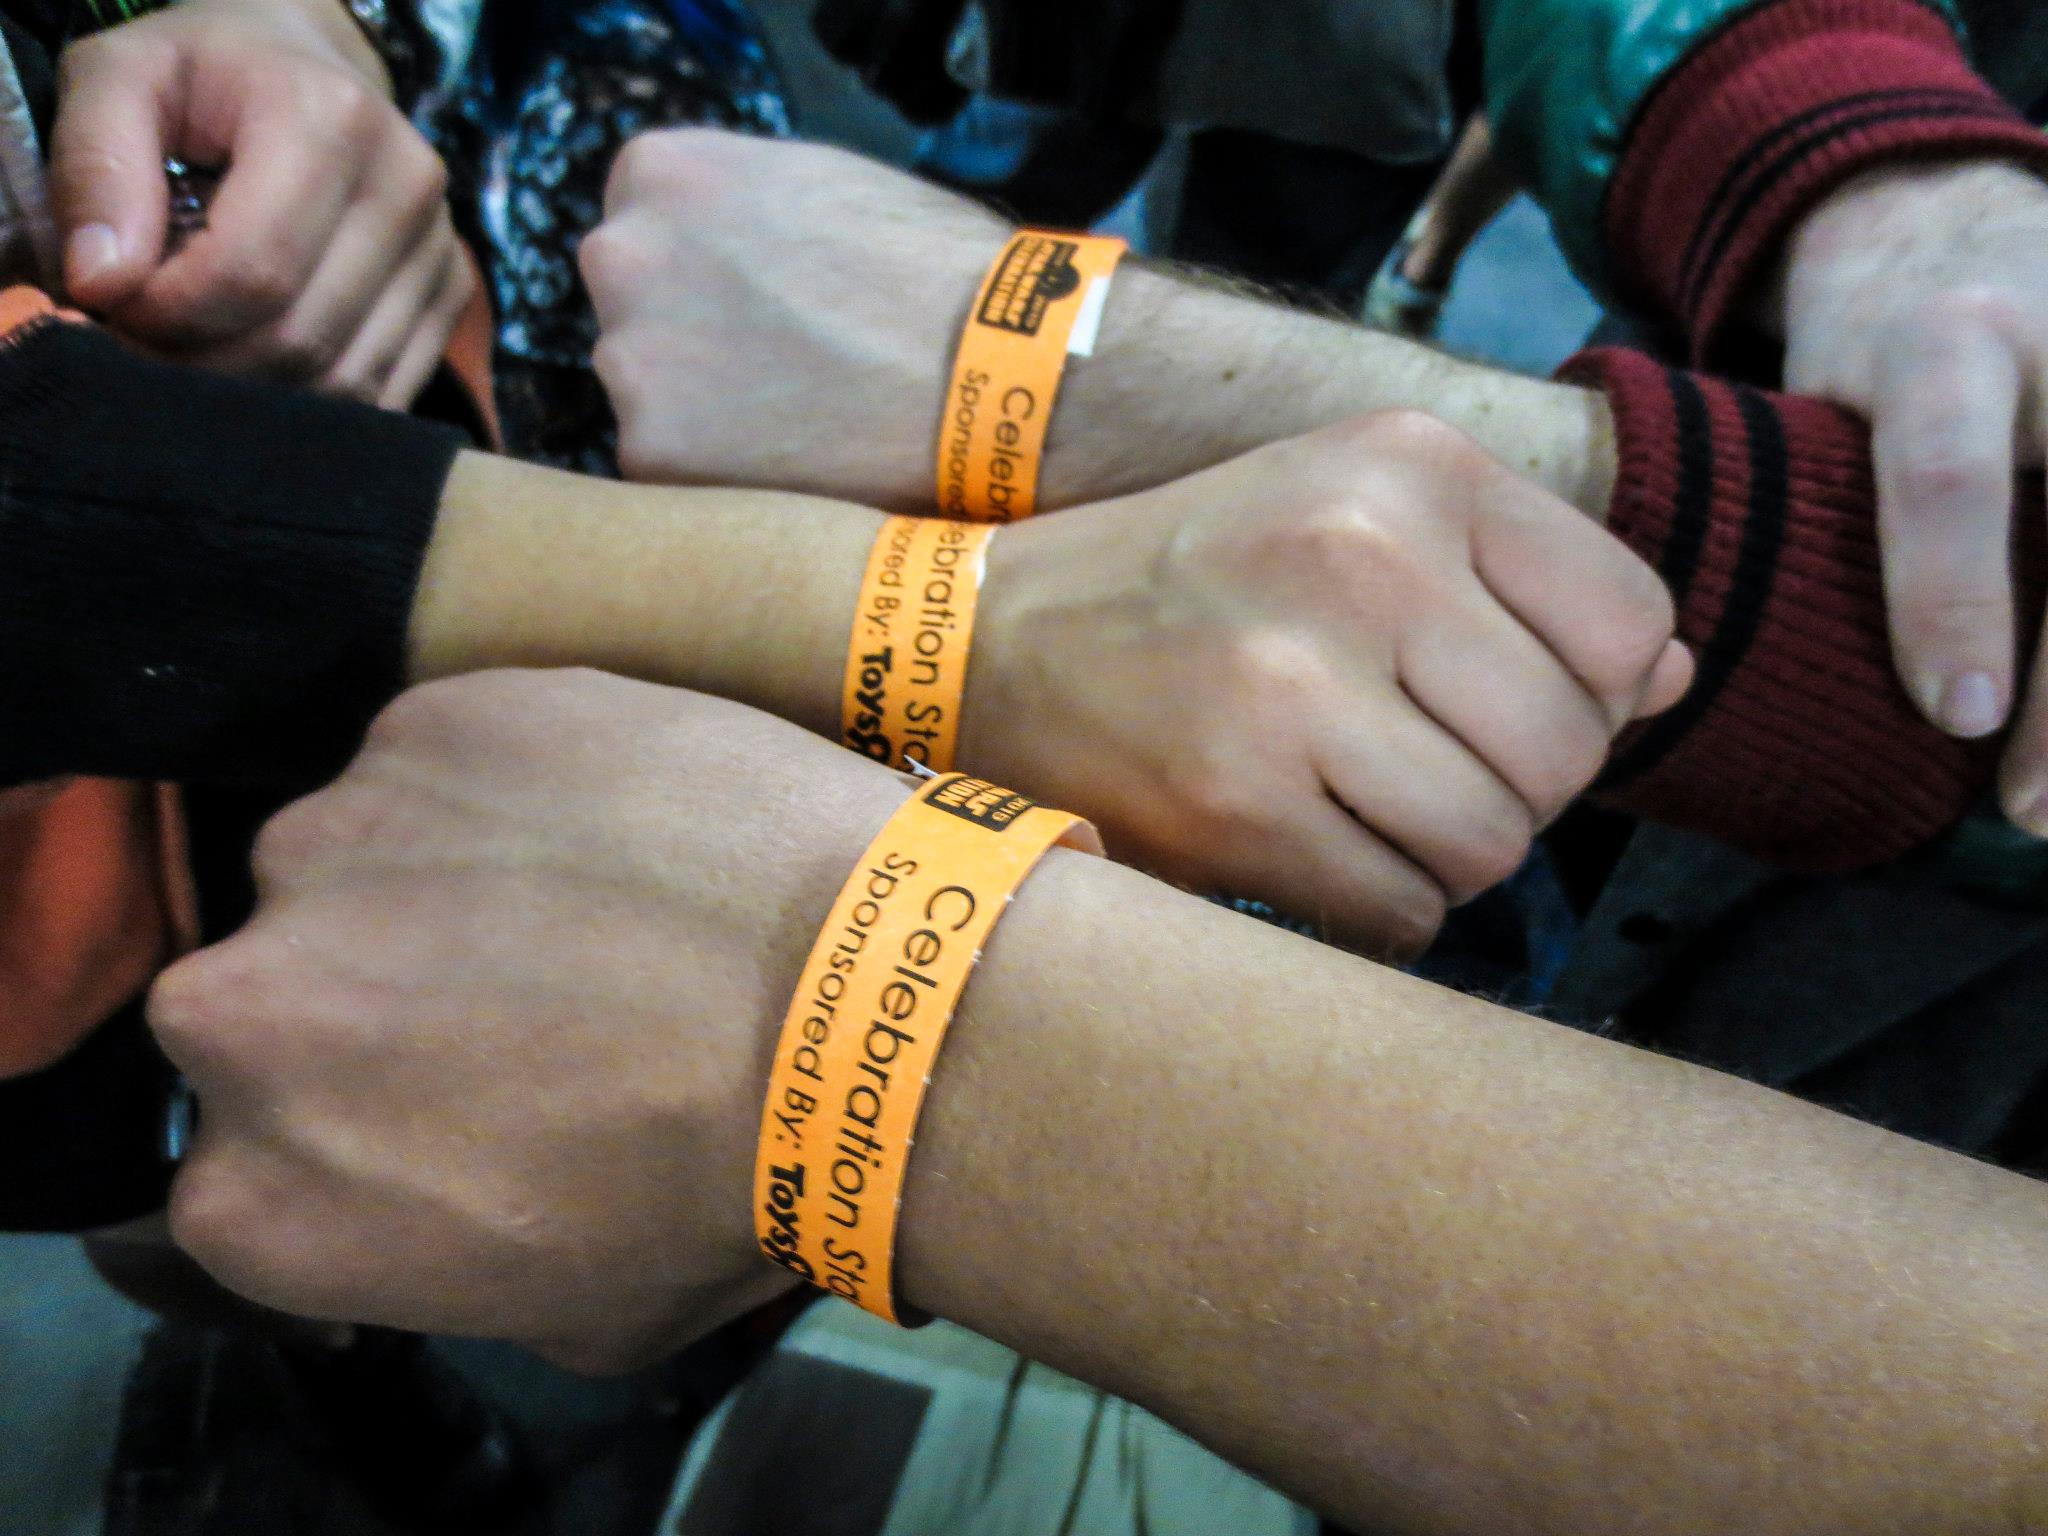 Flashback to Celebration Anaheim's wristband system for the Celebration Stage panel events. 